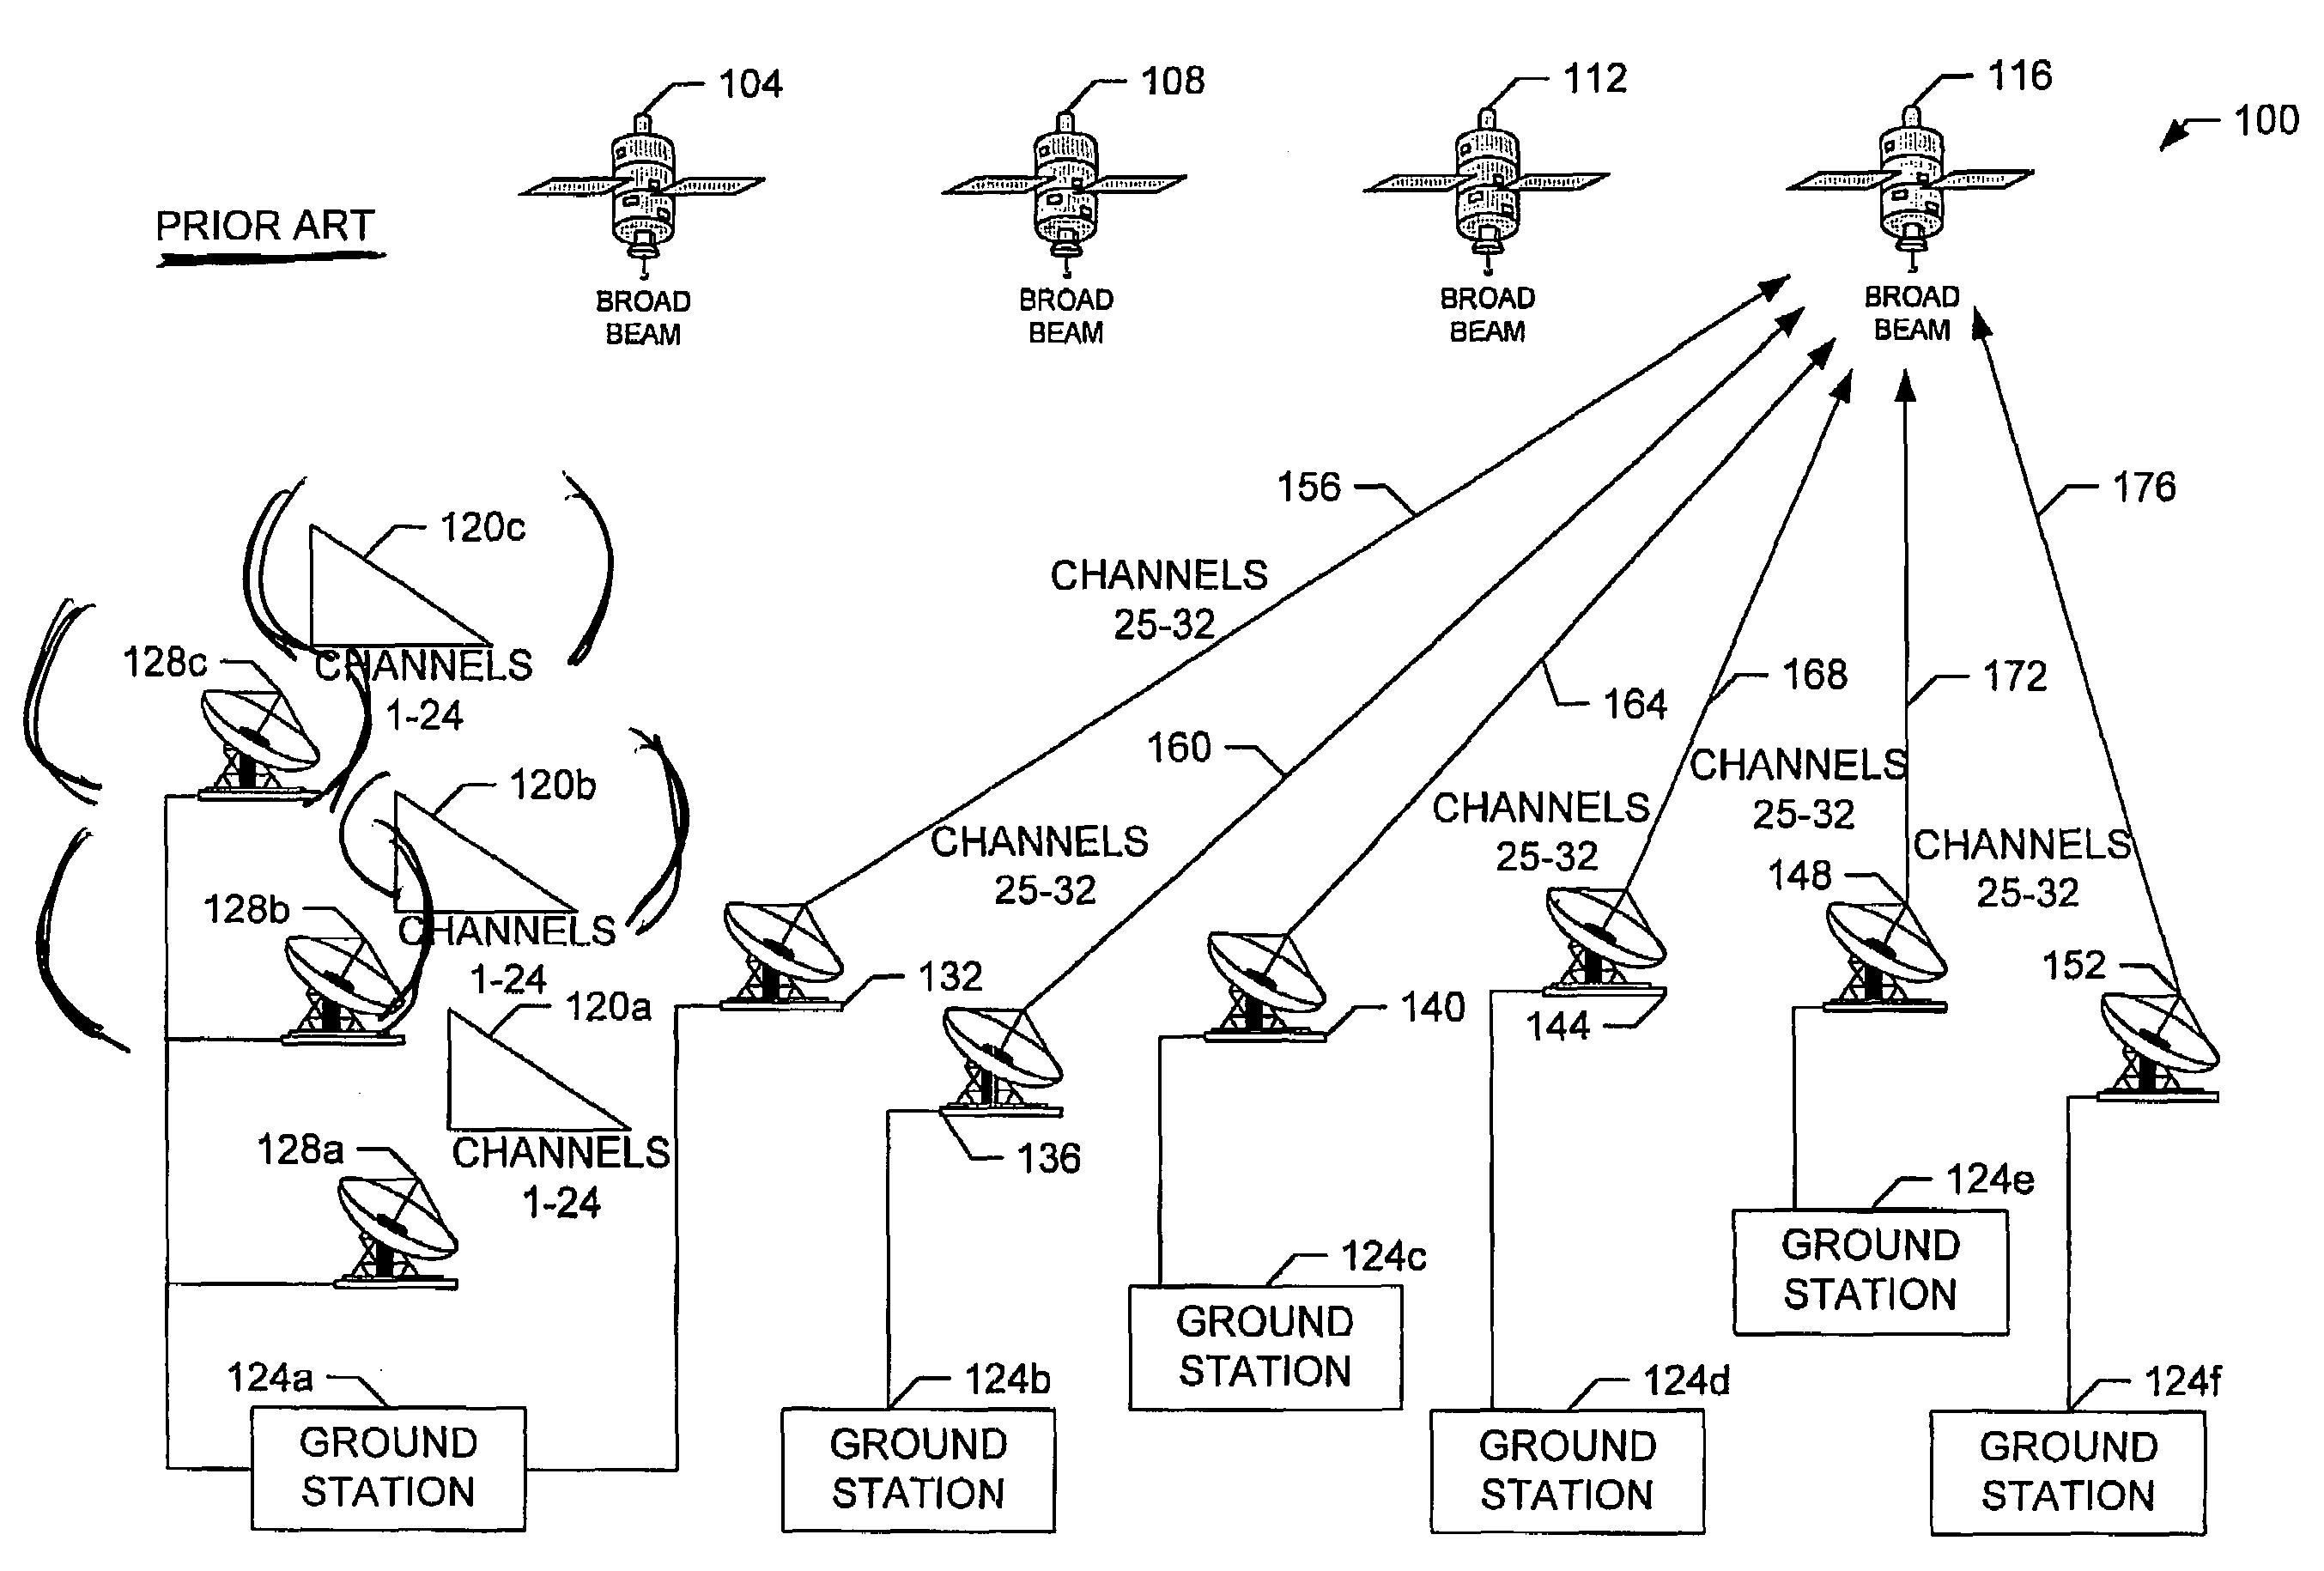 Systems and methods for sharing uplink bandwidth among satellites in a common orbital slot